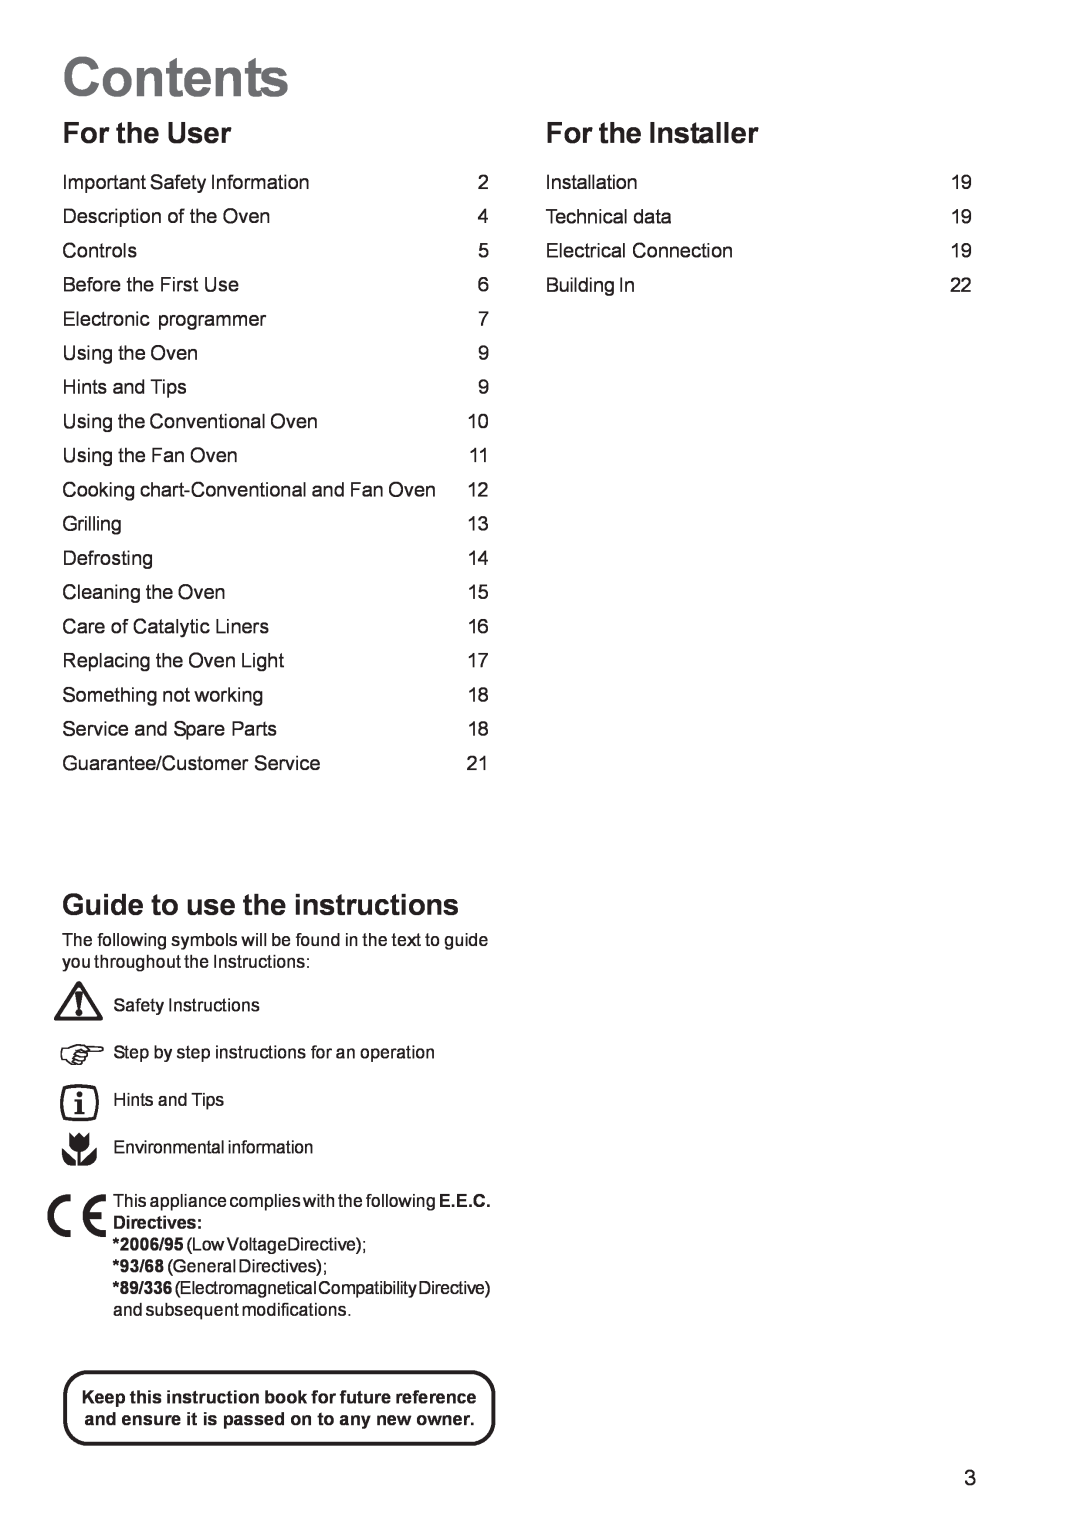 Zanussi ZBS863 manual Contents, For the User, For the Installer, Guide to use the instructions 